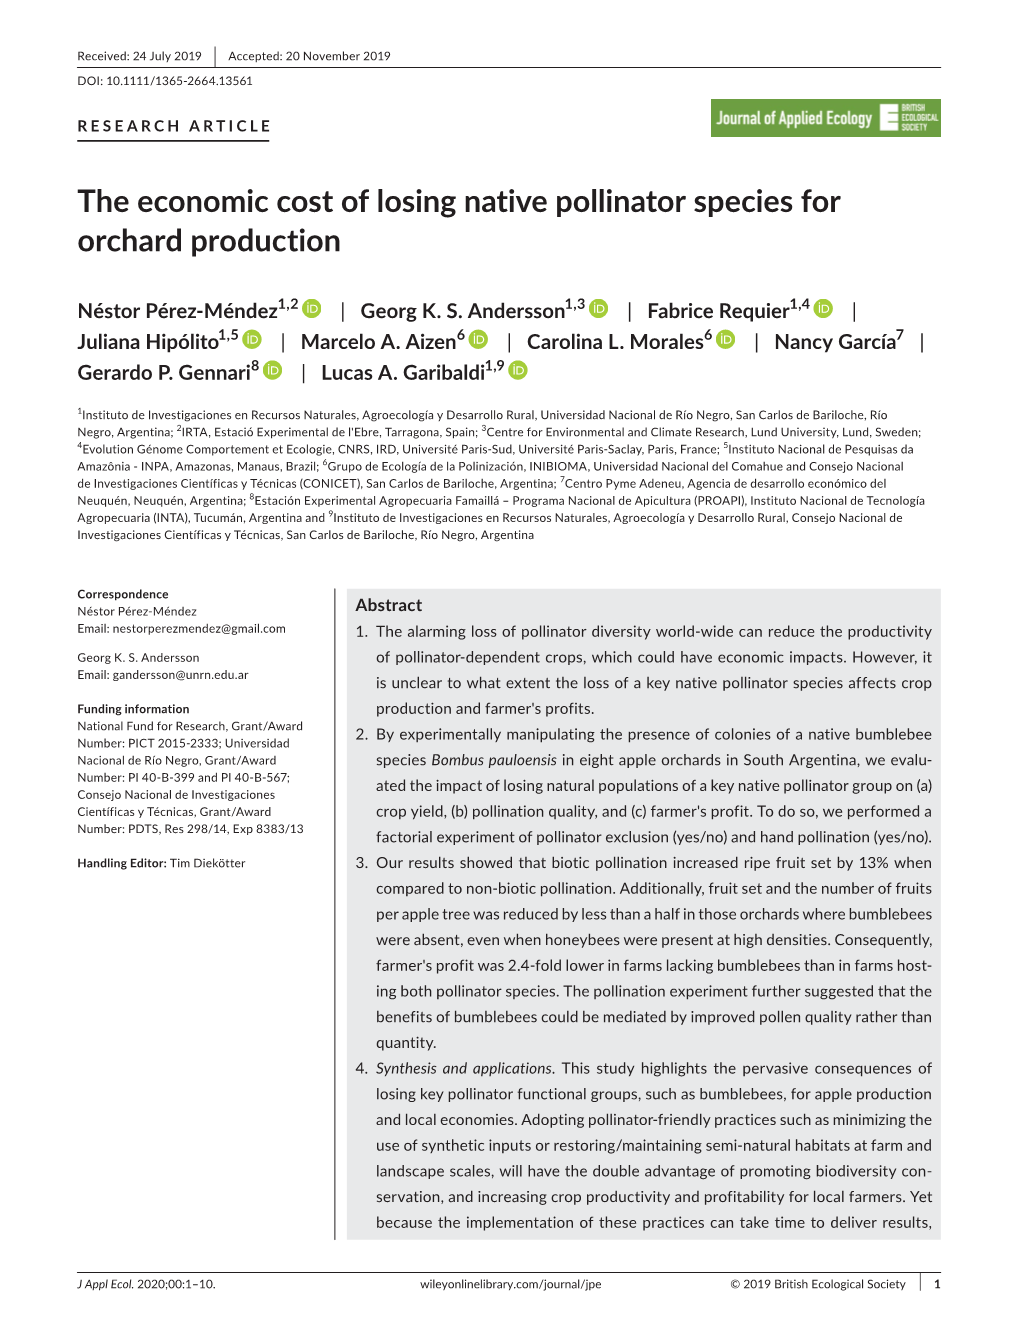 The Economic Cost of Losing Native Pollinator Species for Orchard Production